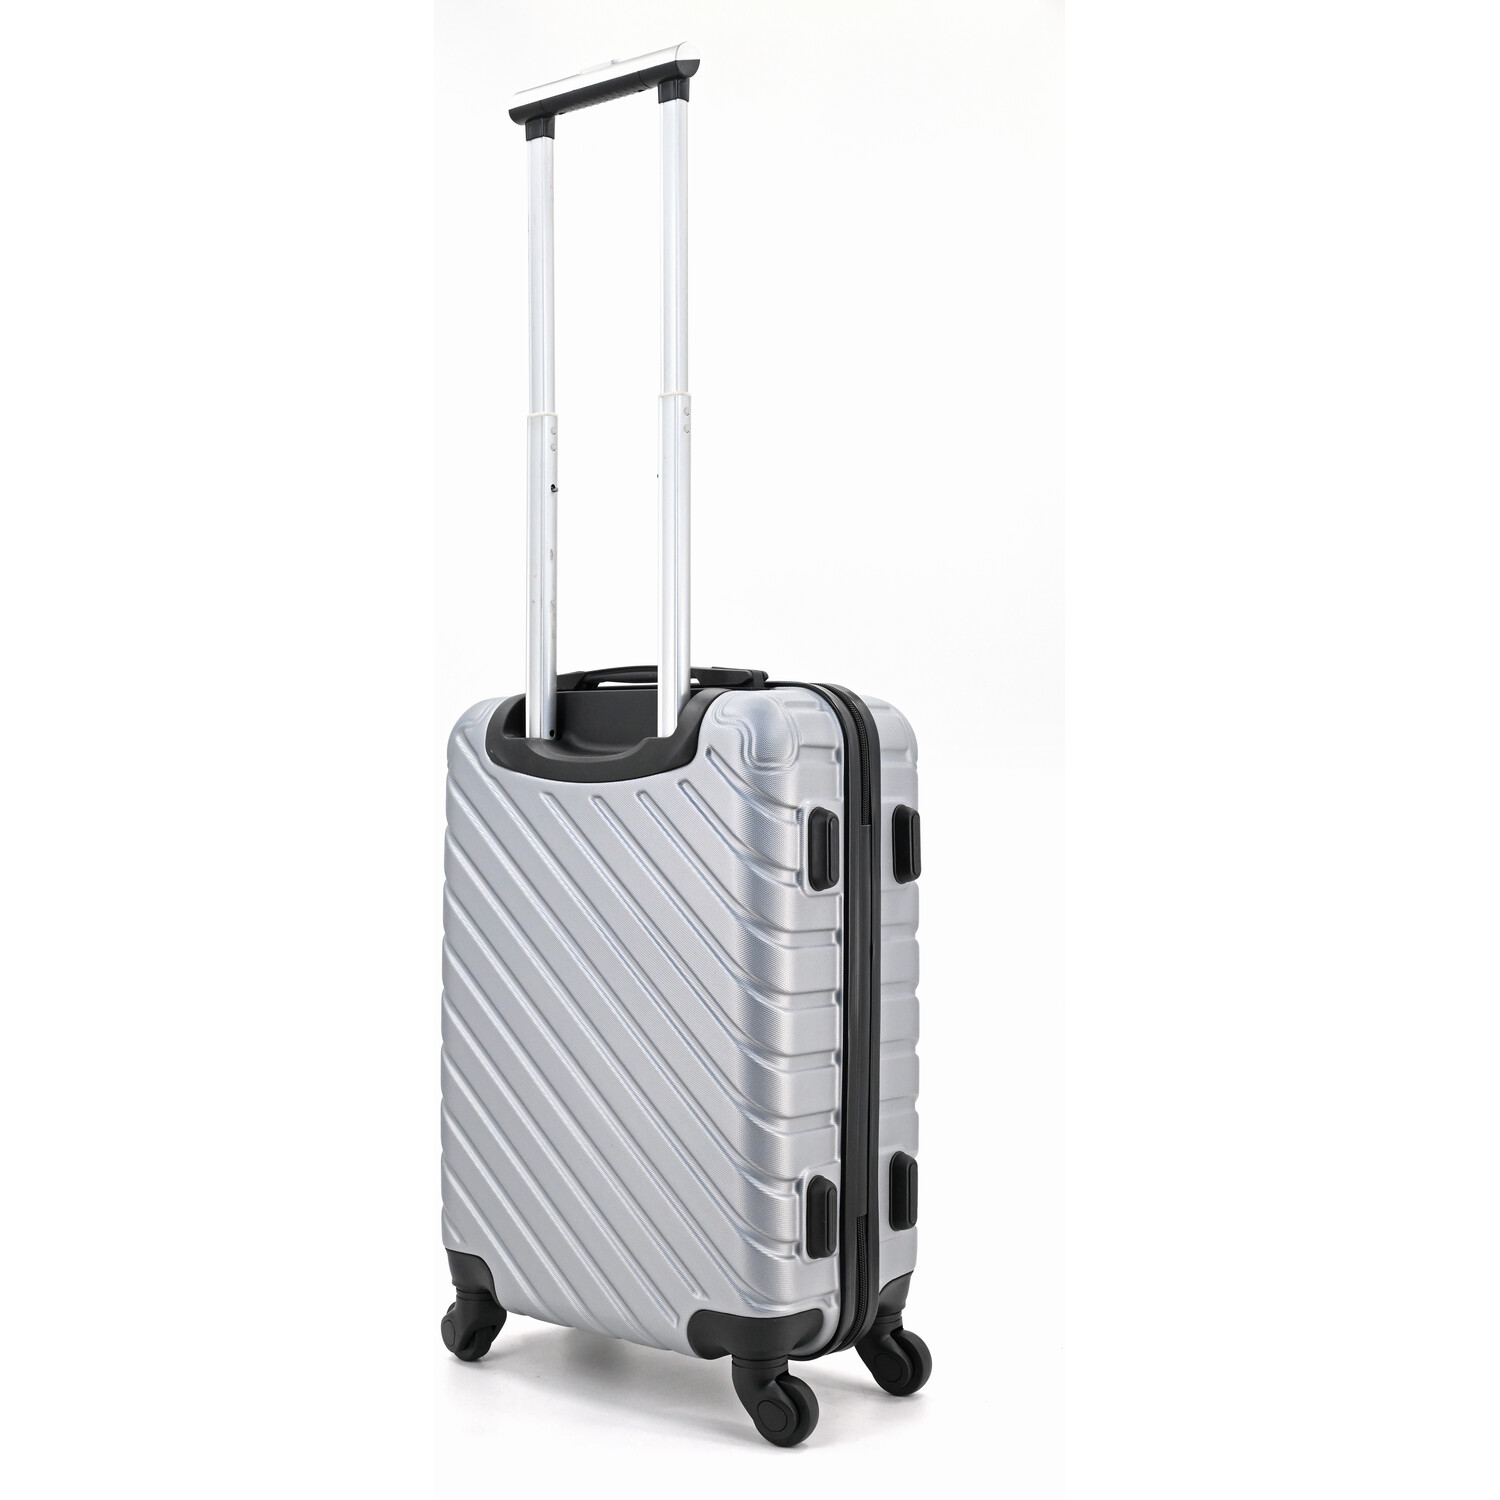 Swift Astral Suitcase - Silver / Cabin Case Image 3